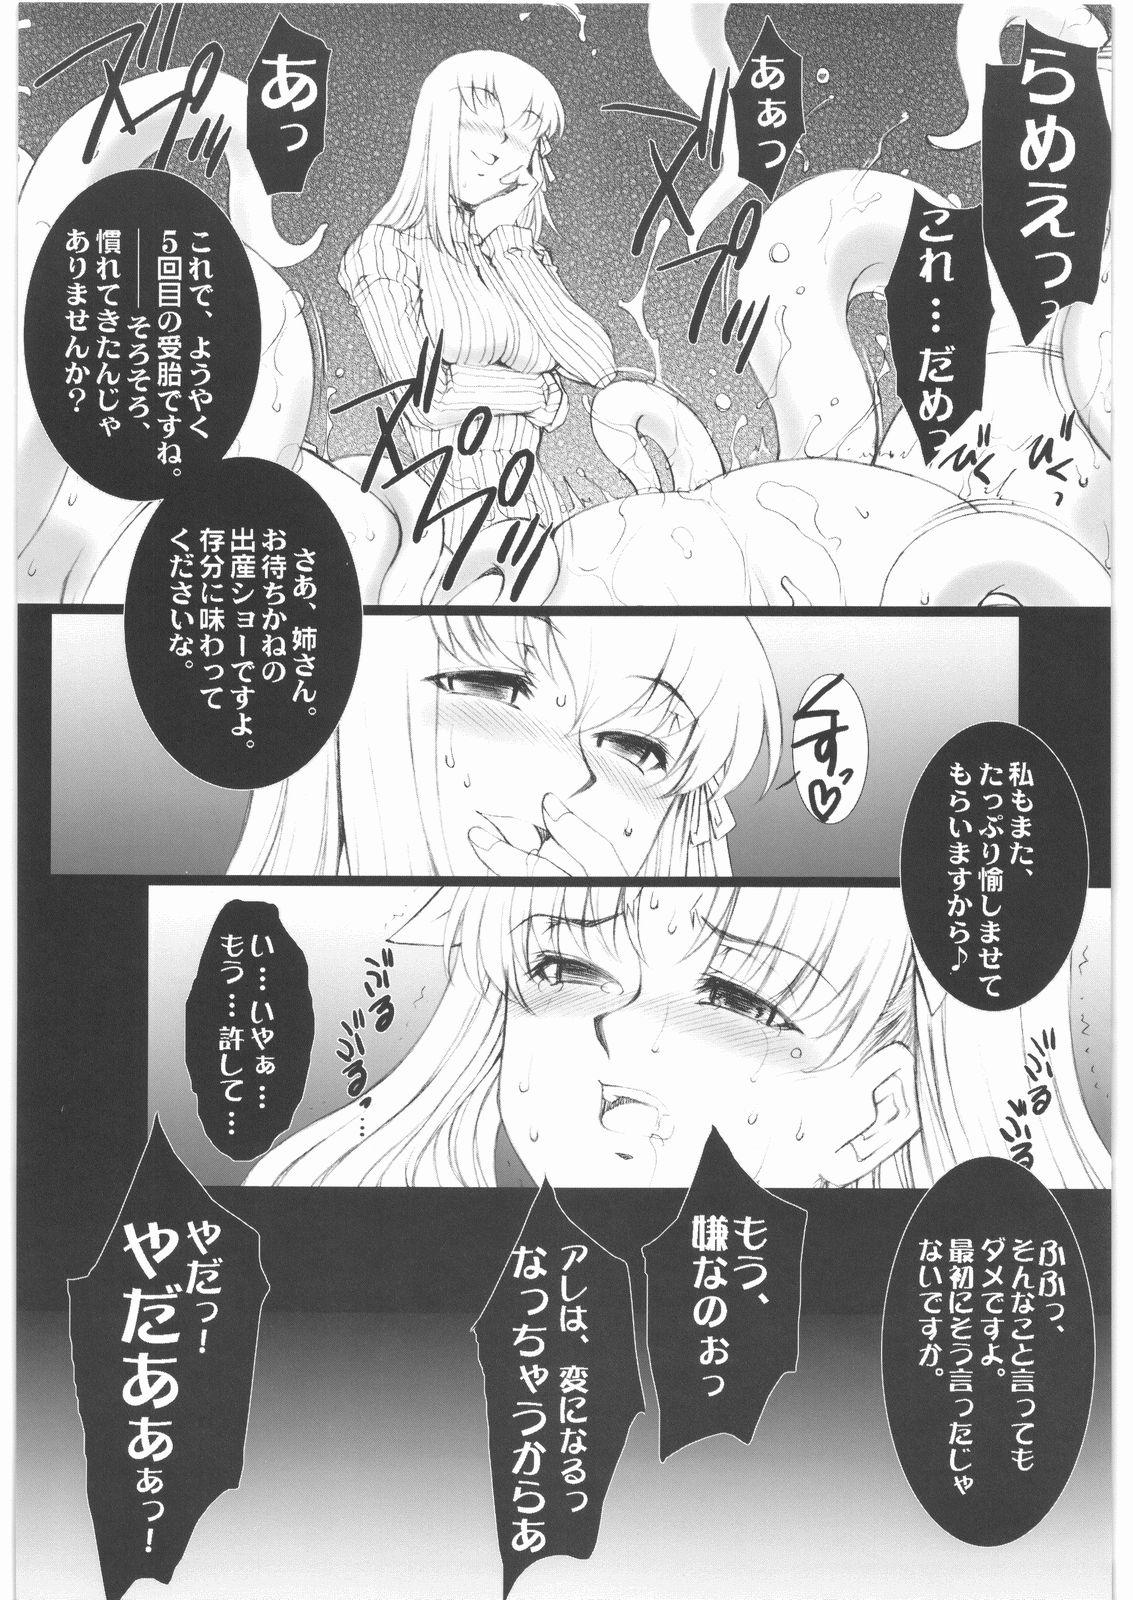 Korea Red Degeneration - Fate stay night Jap - Page 8